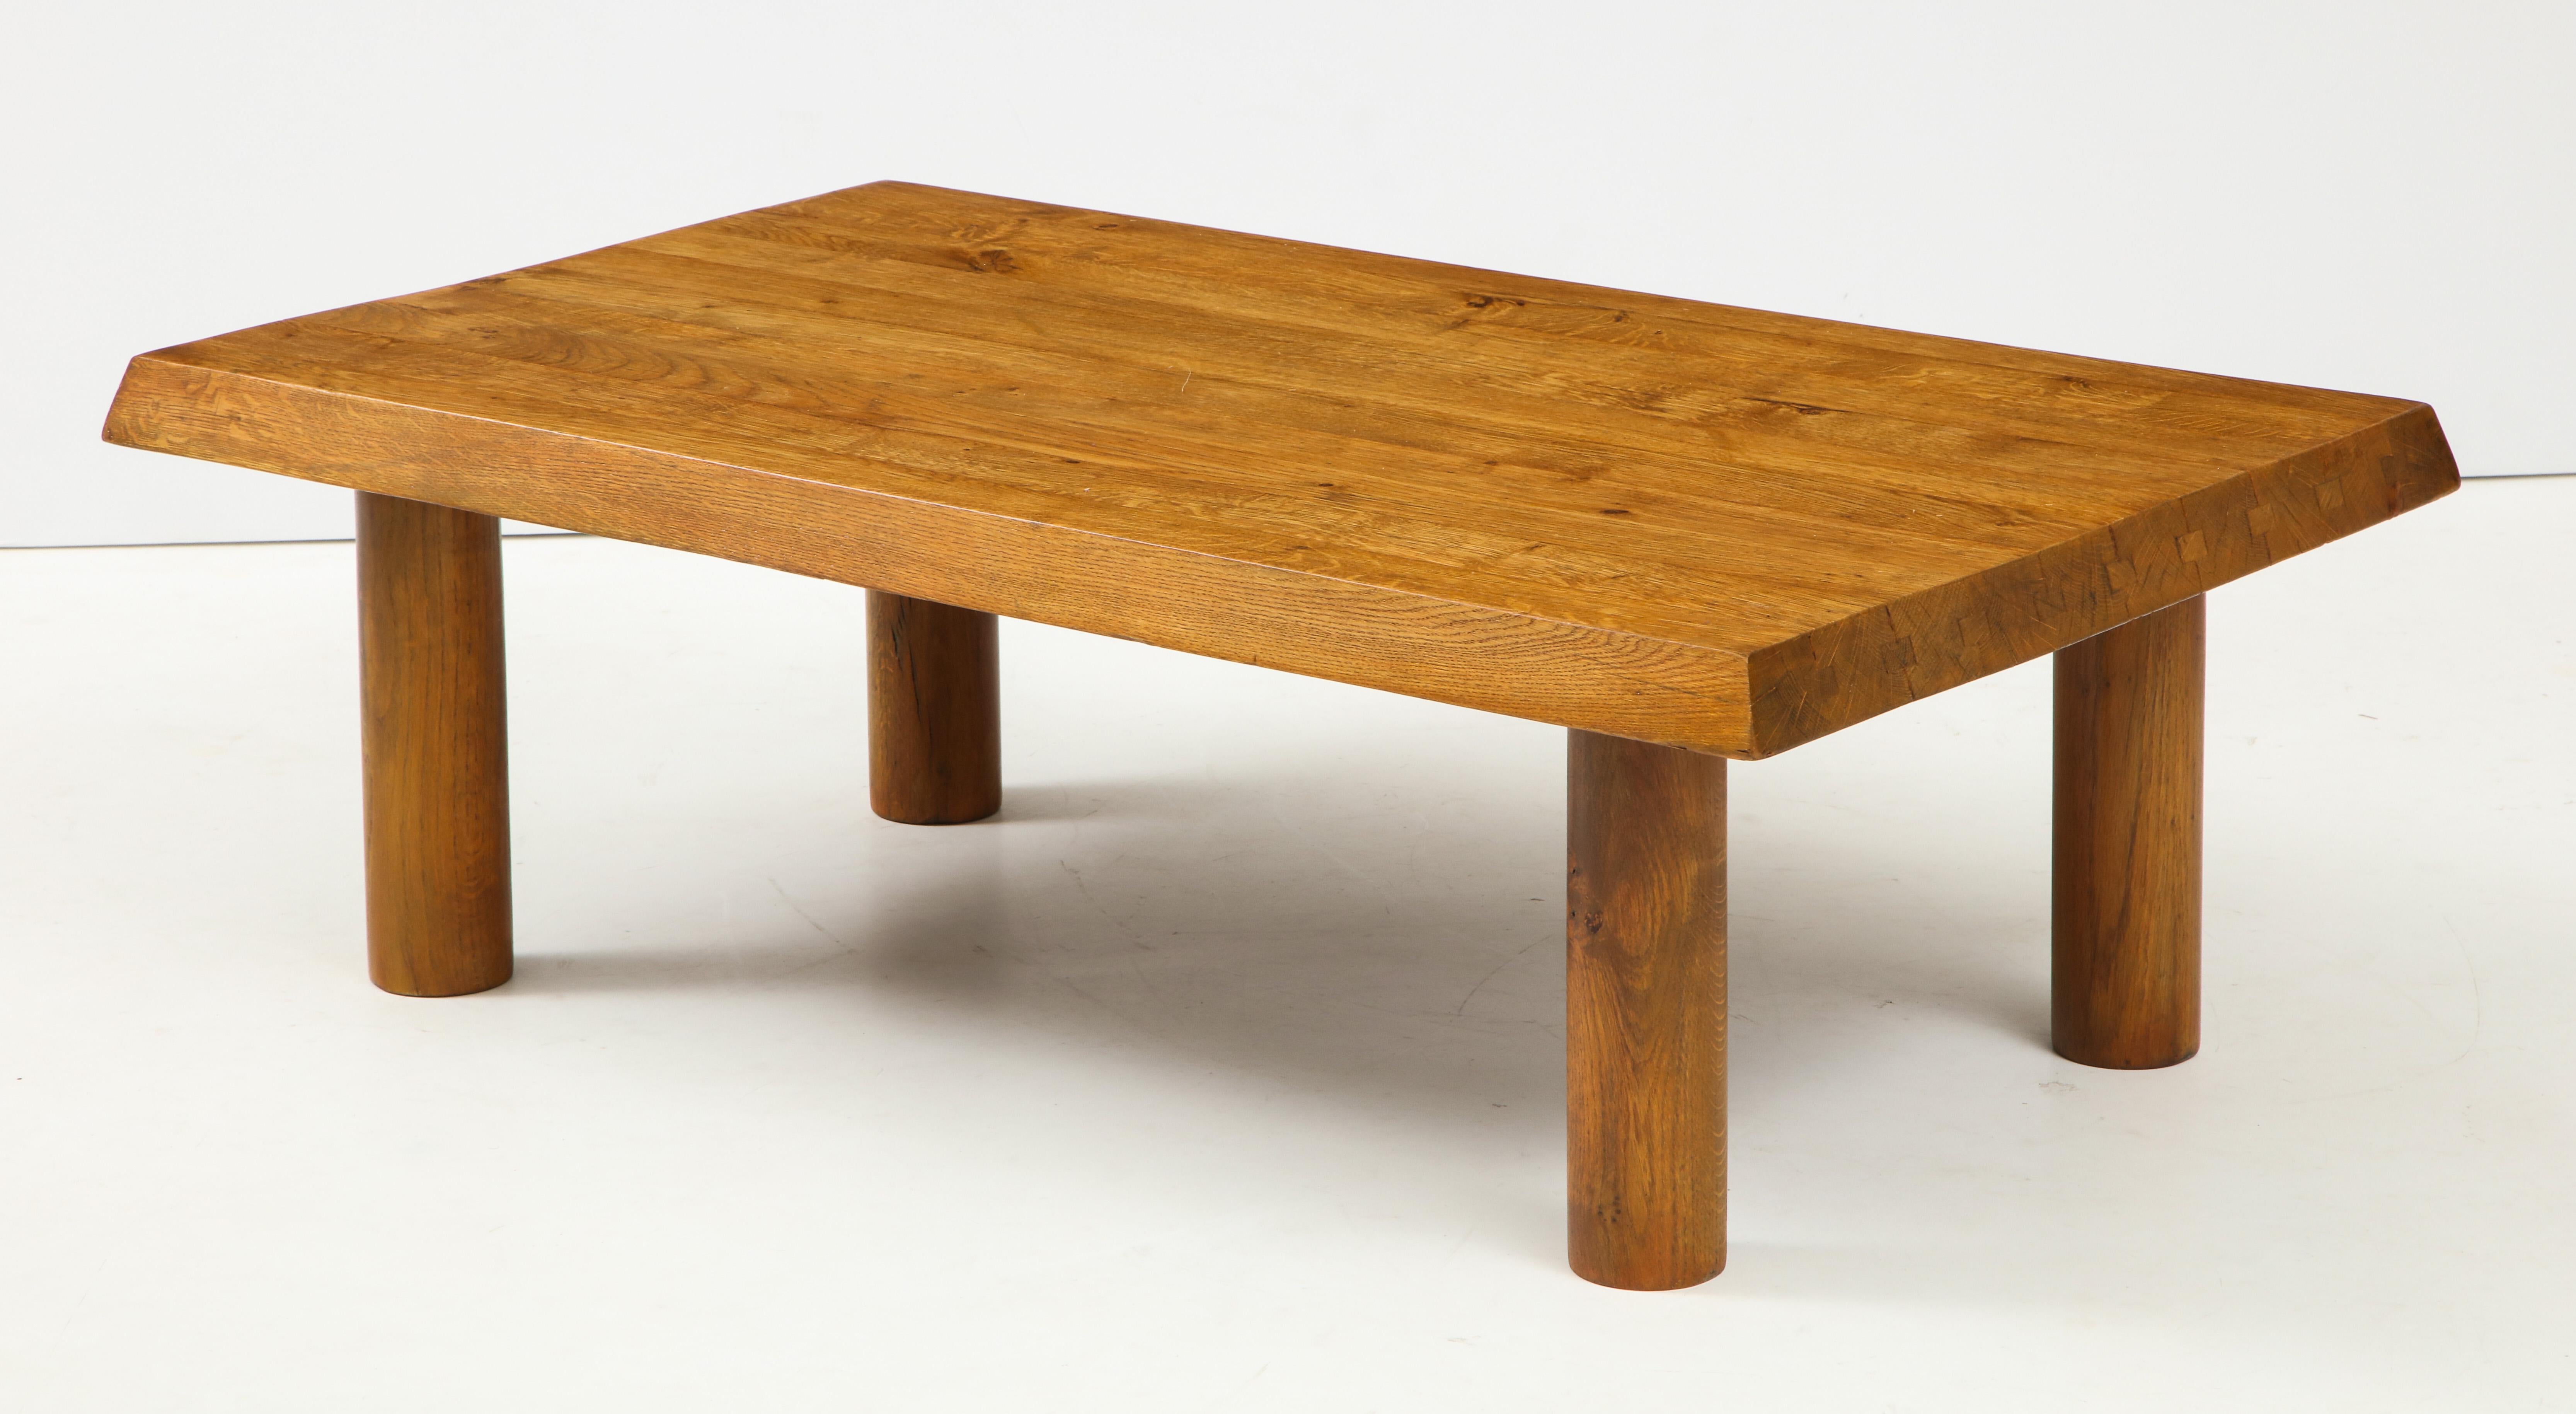 This coffee table was designed in the 1950s and 1960s in France under the inspiration of Charlotte Perriand or Pierre Chapo. Crafted in solid oak, it is composed of four cylindrical feet and a thick rectangular top, assembly by tongues and grooves